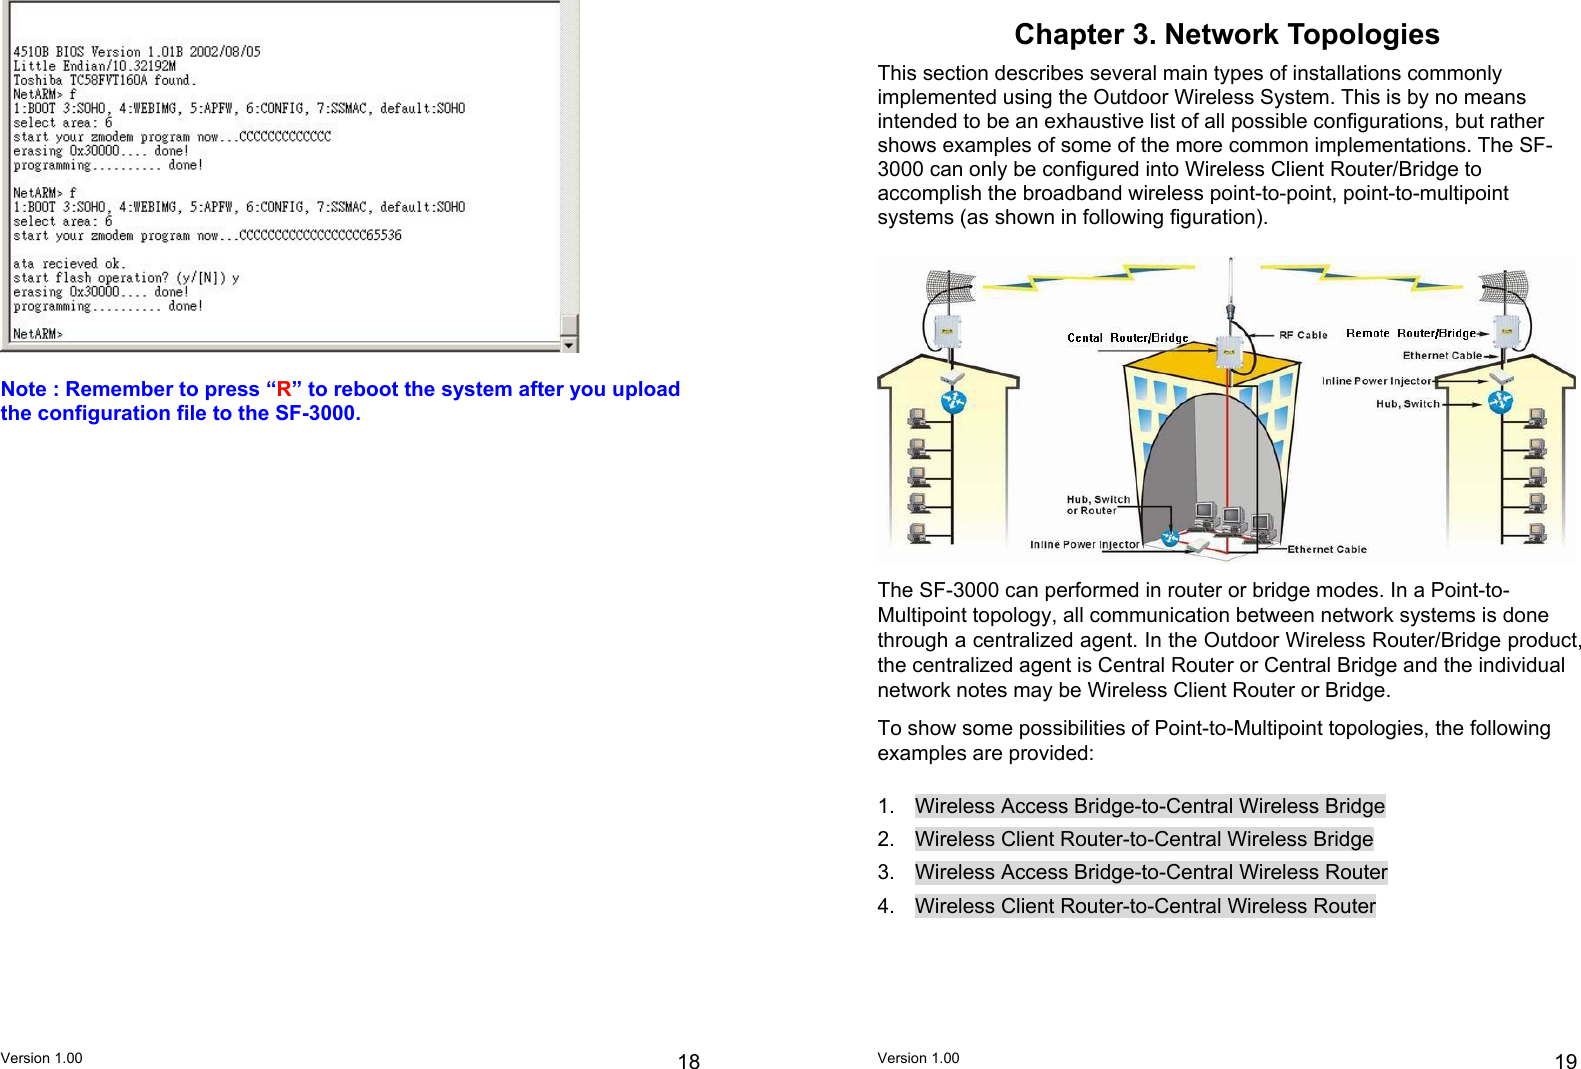 Chapter 3. Network Topologies This section describes several main types of installations commonly implemented using the Outdoor Wireless System. This is by no means intended to be an exhaustive list of all possible configurations, but rather shows examples of some of the more common implementations. The SF-3000 can only be configured into Wireless Client Router/Bridge to accomplish the broadband wireless point-to-point, point-to-multipoint systems (as shown in following figuration).         Note : Remember to press “R” to reboot the system after you upload the configuration file to the SF-3000.          The SF-3000 can performed in router or bridge modes. In a Point-to-Multipoint topology, all communication between network systems is done through a centralized agent. In the Outdoor Wireless Router/Bridge product, the centralized agent is Central Router or Central Bridge and the individual network notes may be Wireless Client Router or Bridge. To show some possibilities of Point-to-Multipoint topologies, the following examples are provided:  1.  Wireless Access Bridge-to-Central Wireless Bridge  2.  Wireless Client Router-to-Central Wireless Bridge 3.  Wireless Access Bridge-to-Central Wireless Router 4.  Wireless Client Router-to-Central Wireless Router  Version 1.00  18 Version 1.00  19